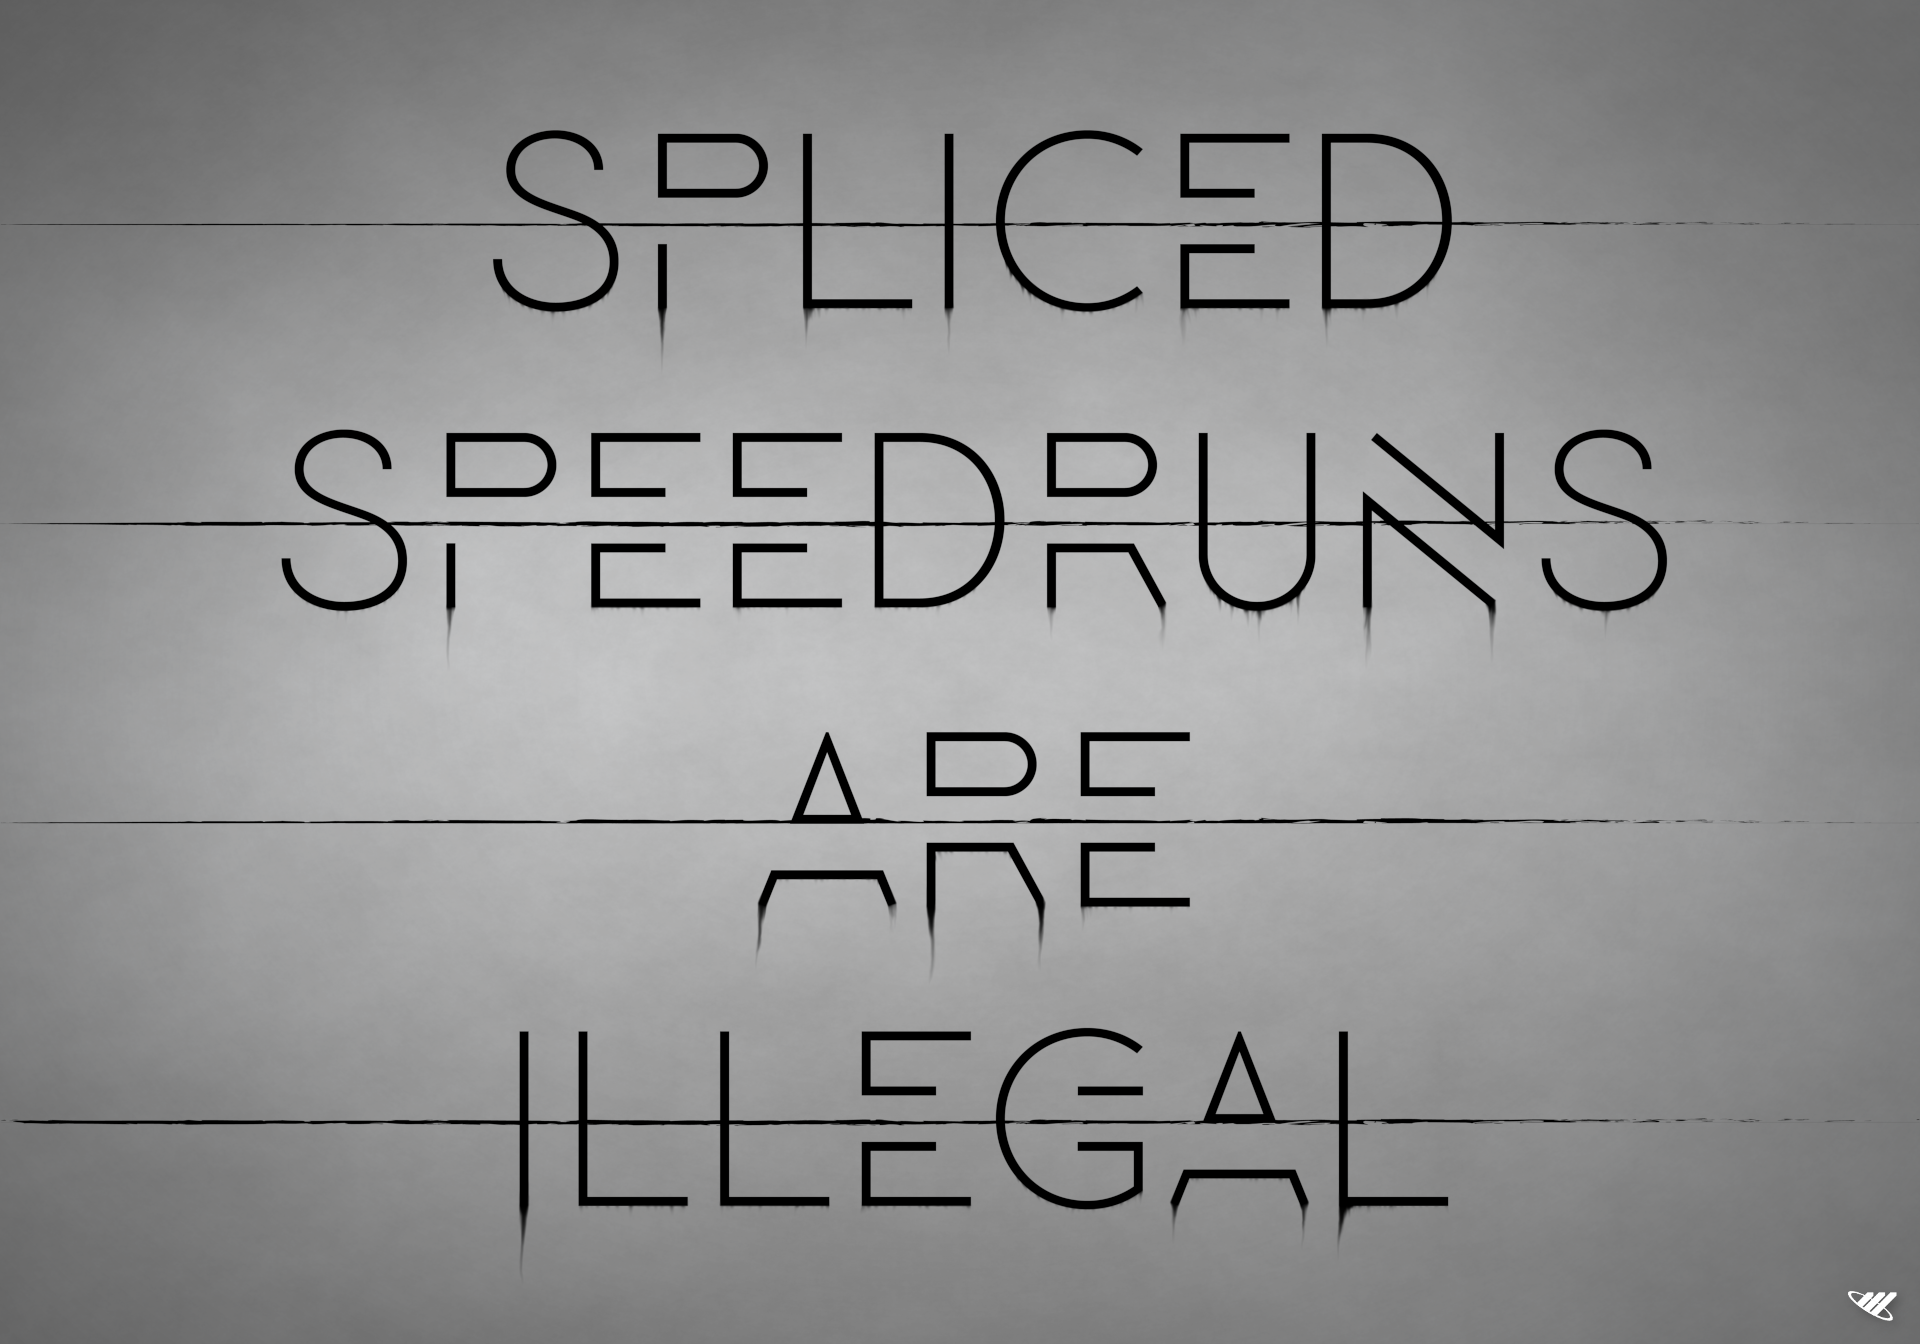 Artwork with the text Spliced Speedruns Are Illegal